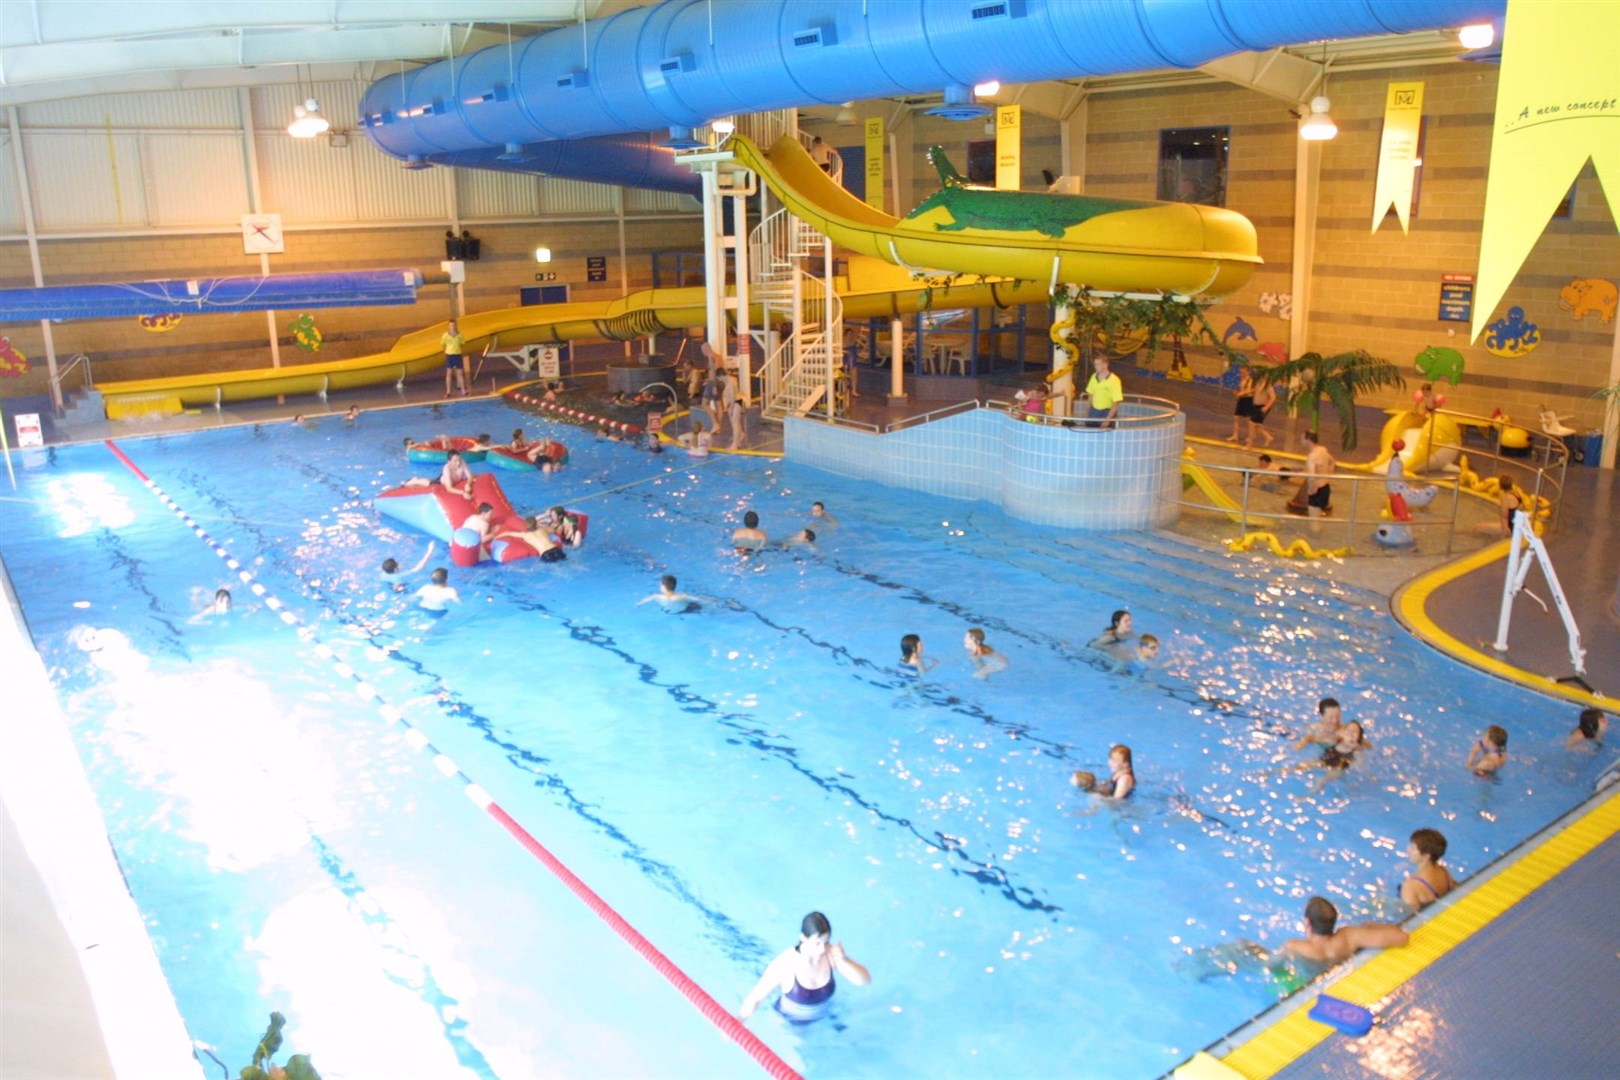 Both pools at Moray Leisure Centre are closed due to a loss of heating and hot water.